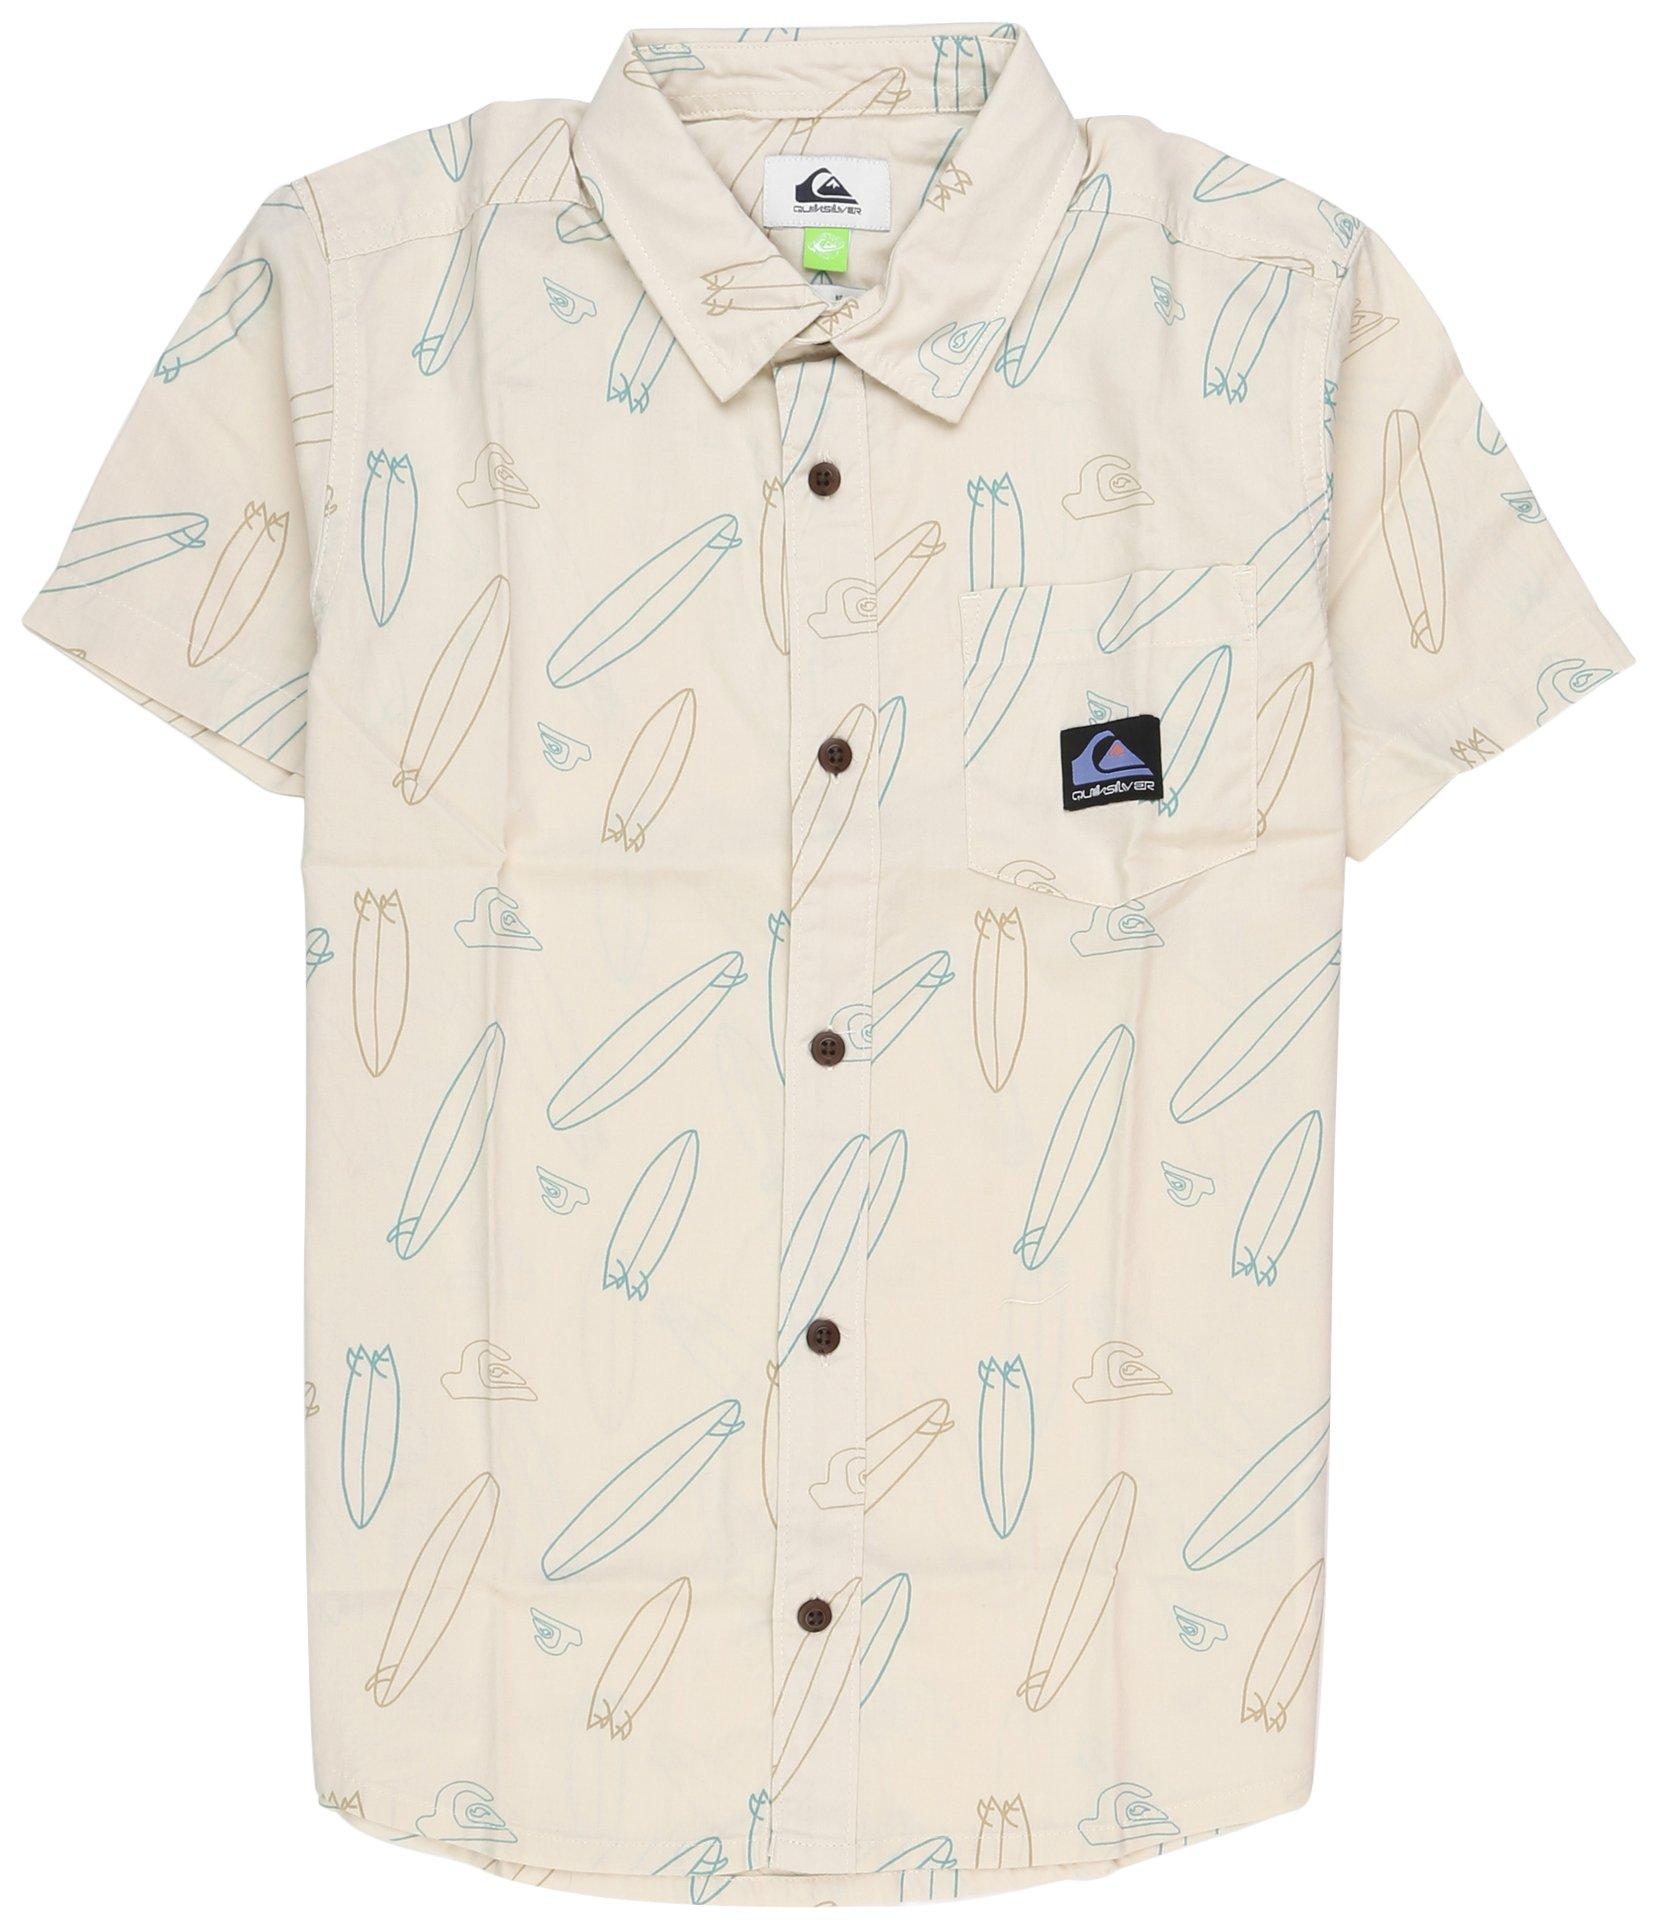 Big Boys Paddle Boards Shadow Short Sleeve Button Up Shirt